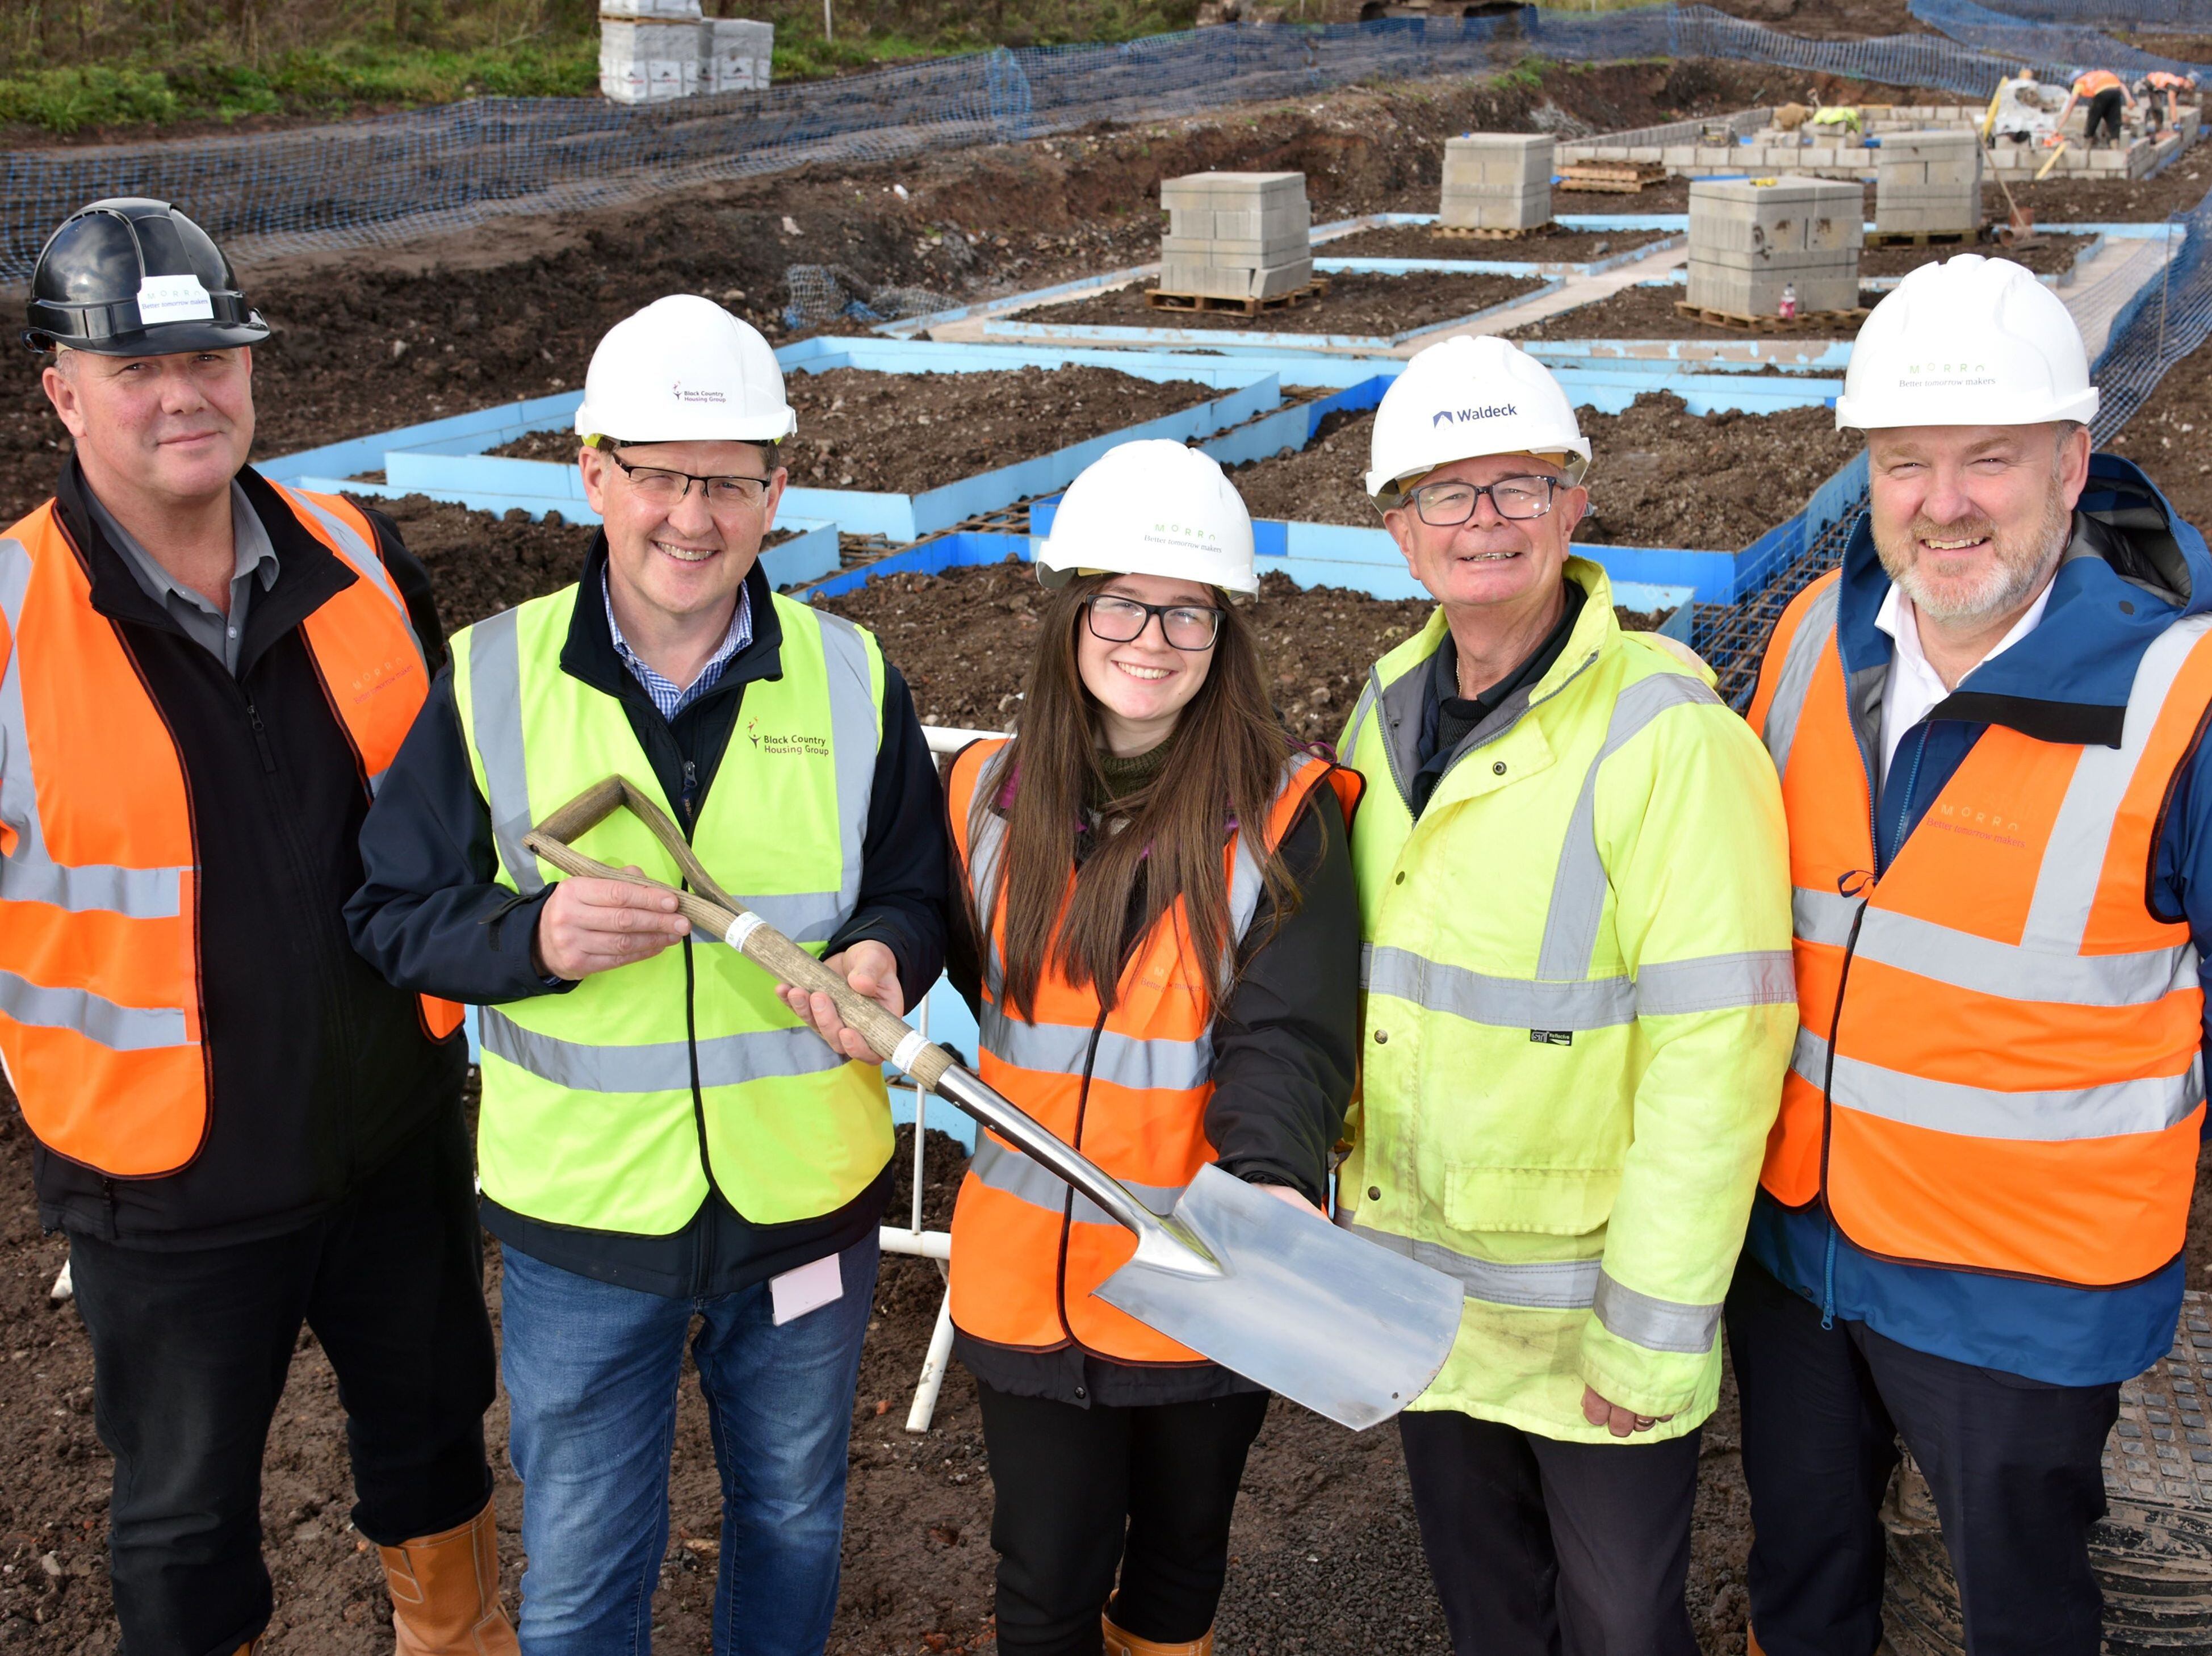 Work starts on new Bilston homes at site of former ironworks